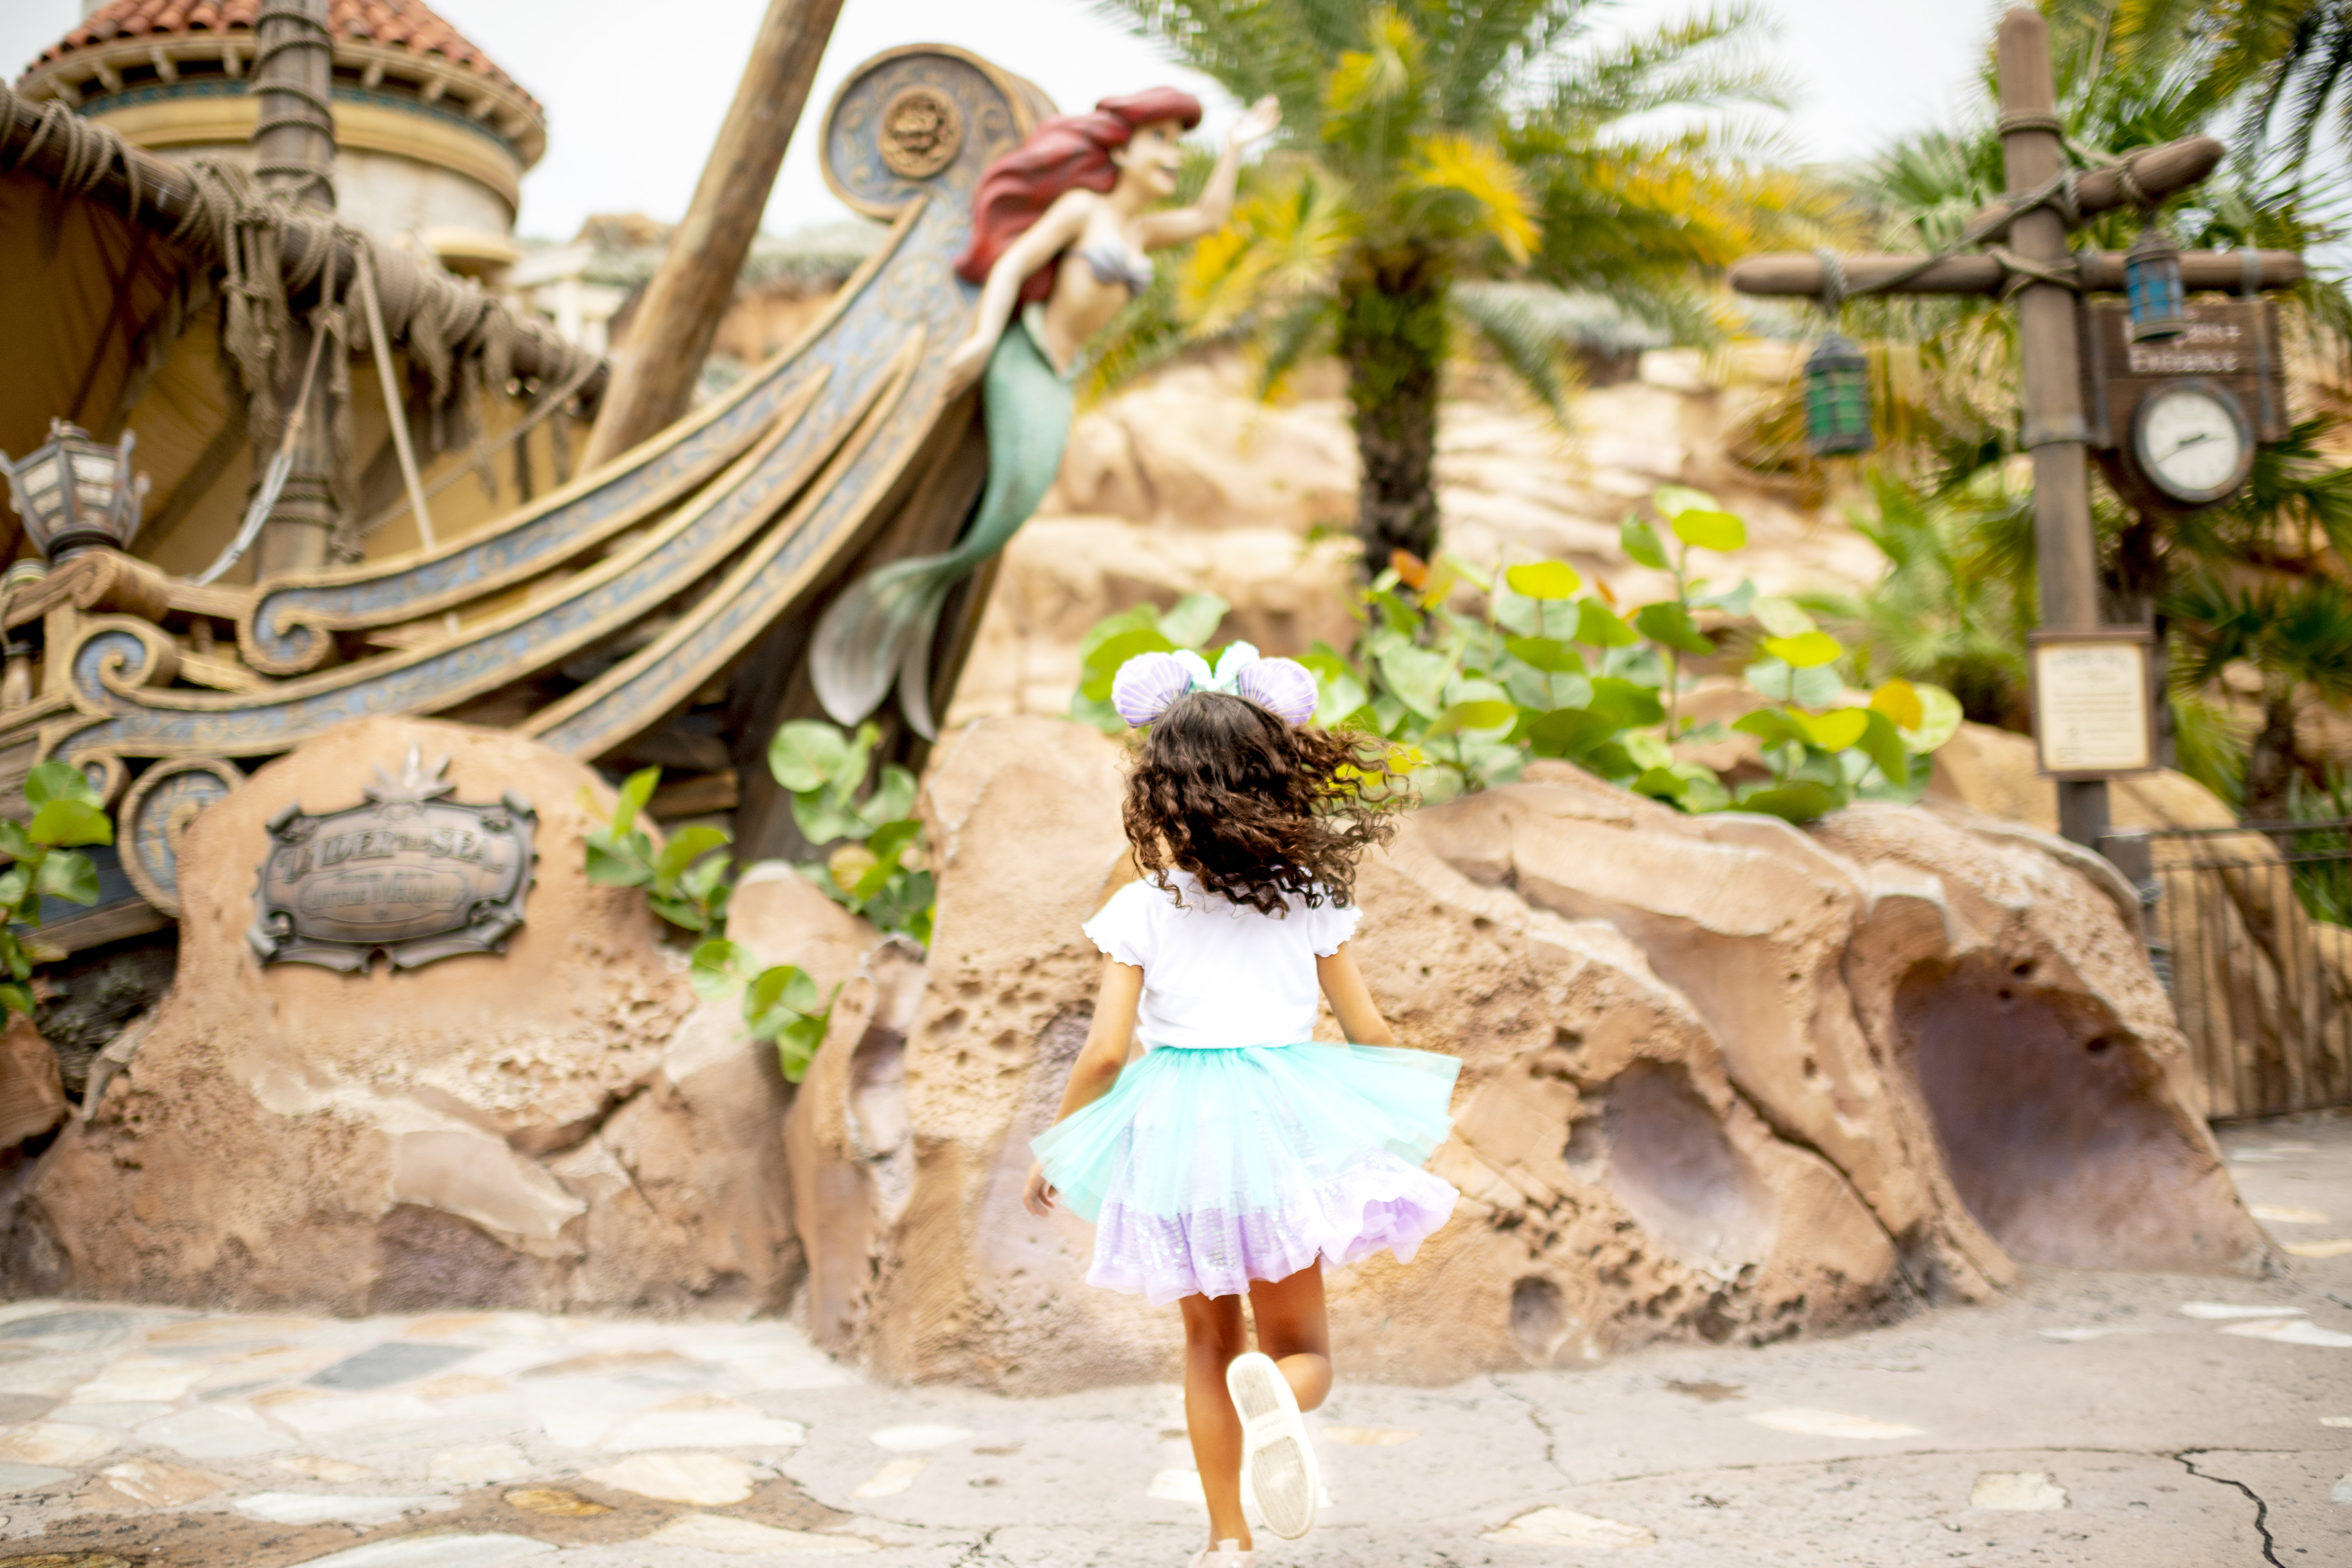 Be part of her world at Voyage of the Little Mermaid